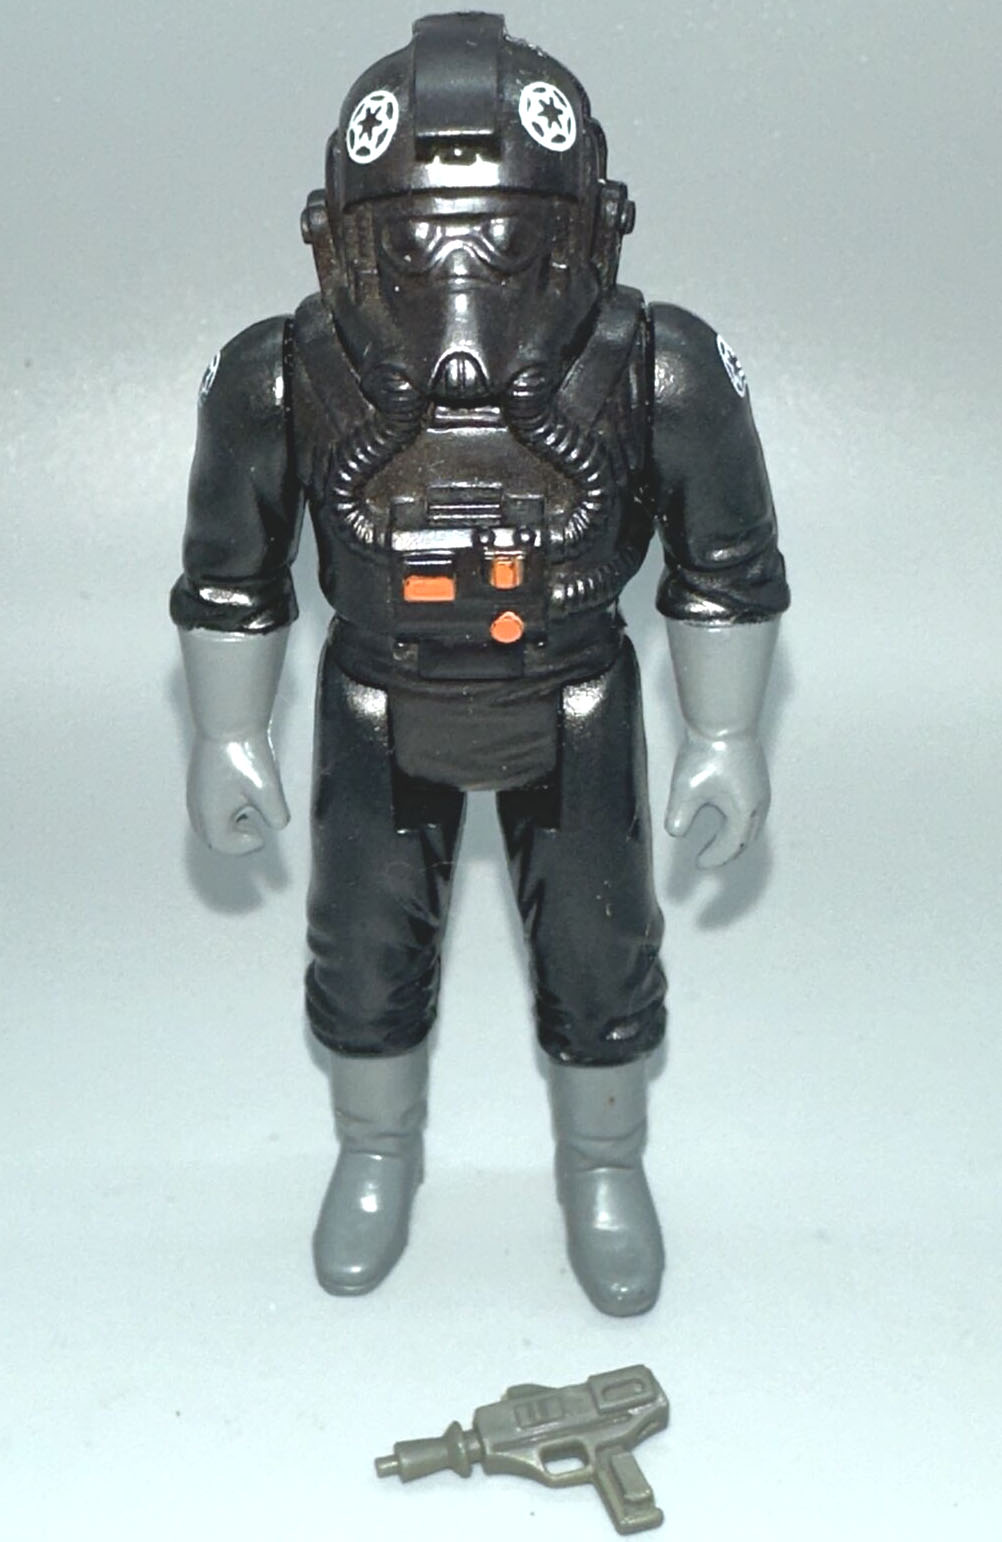 Star Wars Tie Fighter Pilot (Ep 5) 3.75 Inch Action Figure - Used